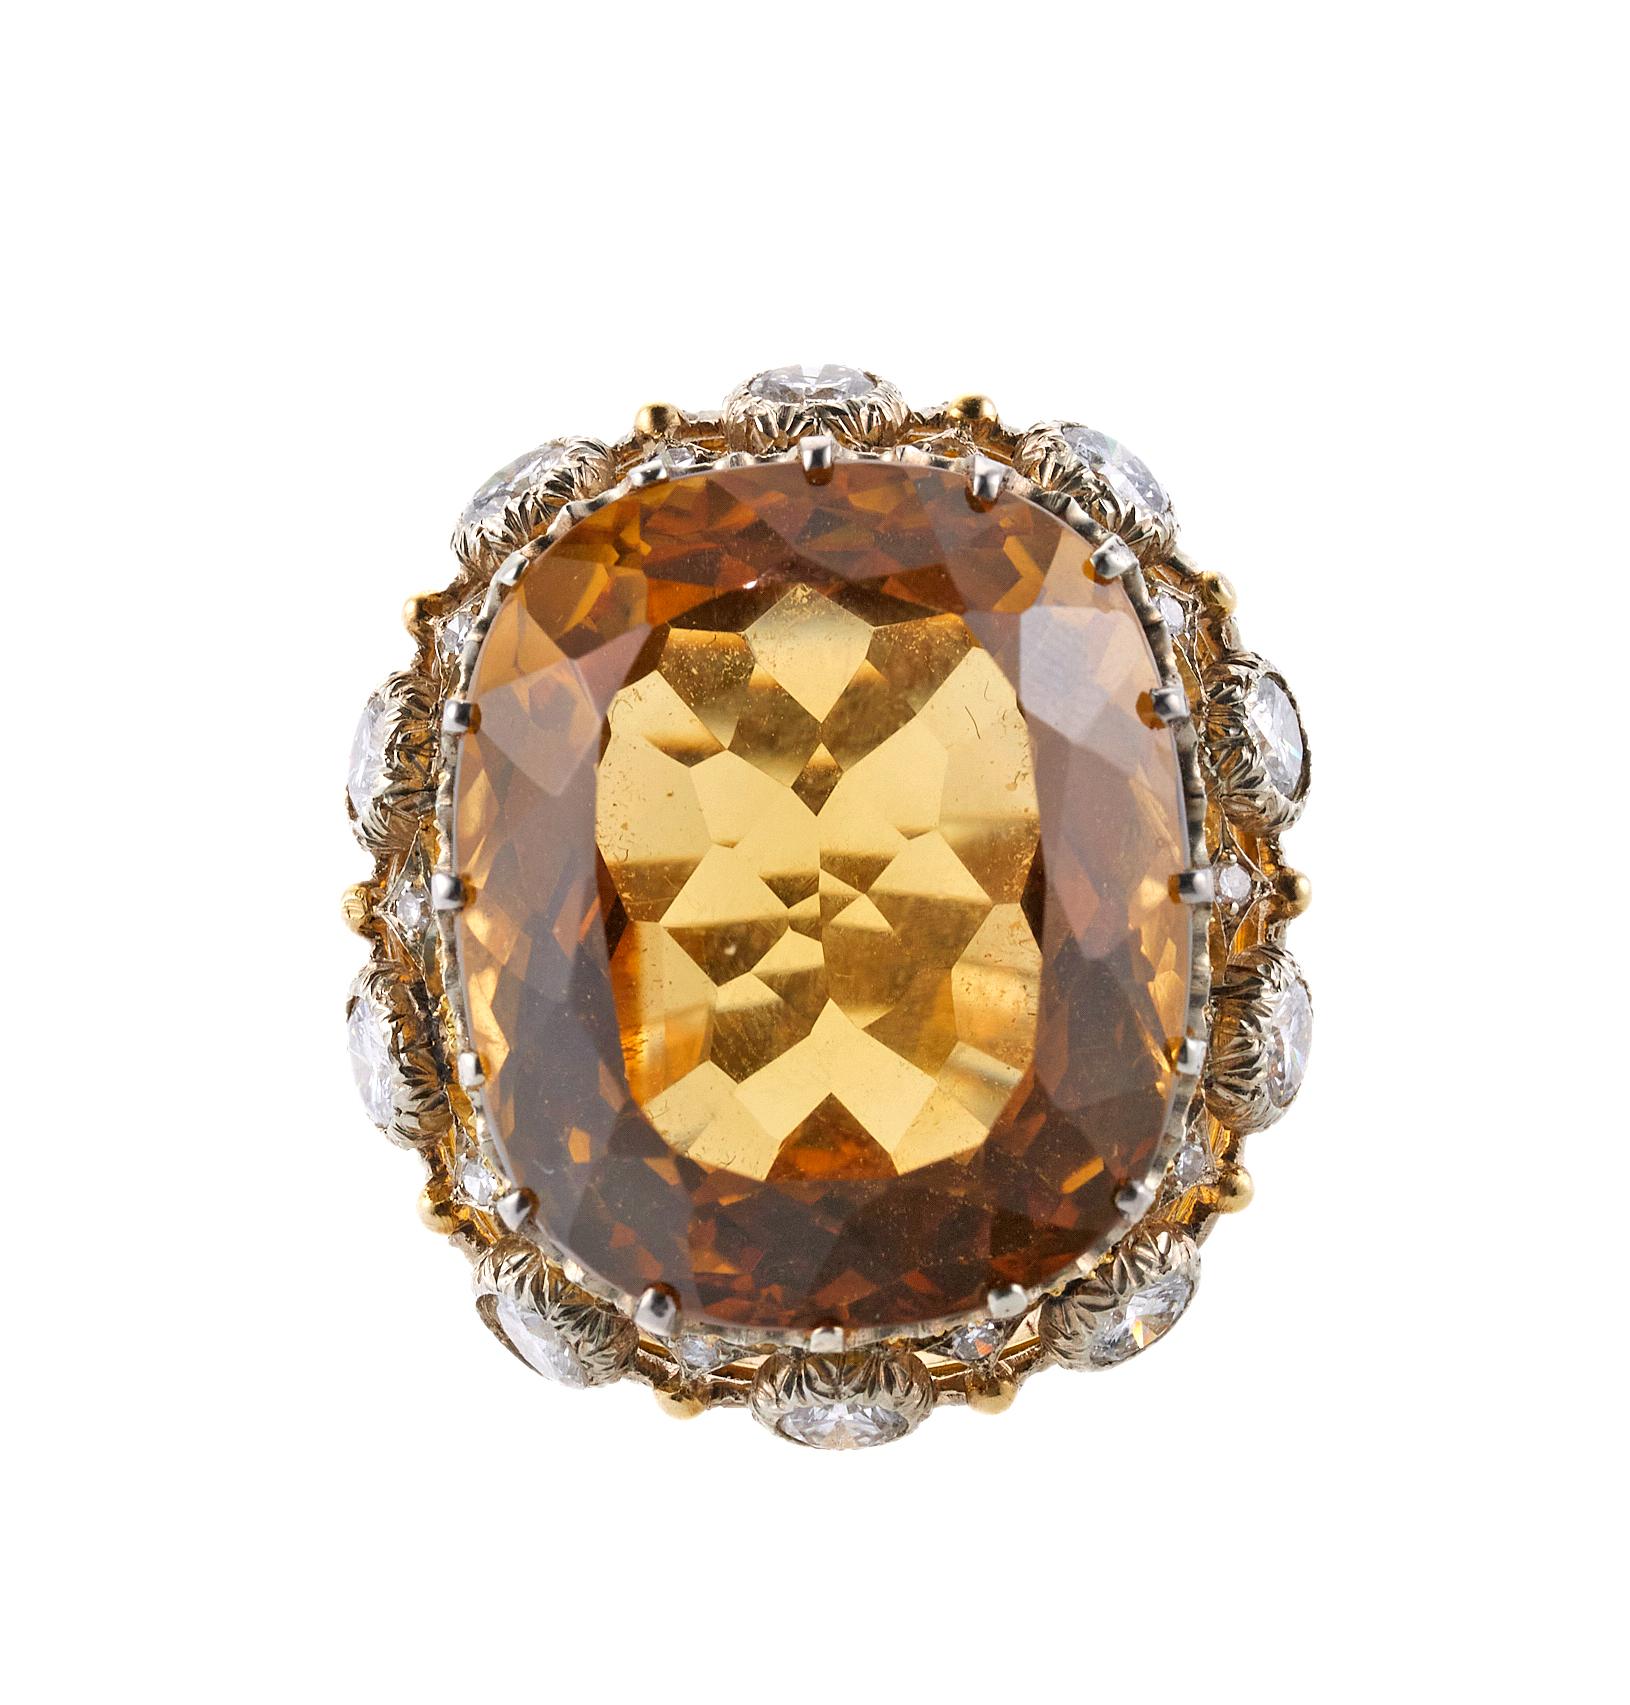 Buccellati cocktail ring in 18K gold, with center 32ct citrine stone measures 23.2mm x 19.9mm x 13.15mm and approx. 2.10ctw in SI/H diamonds. Ring size 6, top measures 30mm x 26mm. Marked: Buccellati, Italy,18k. Weight is 18.0 grams.